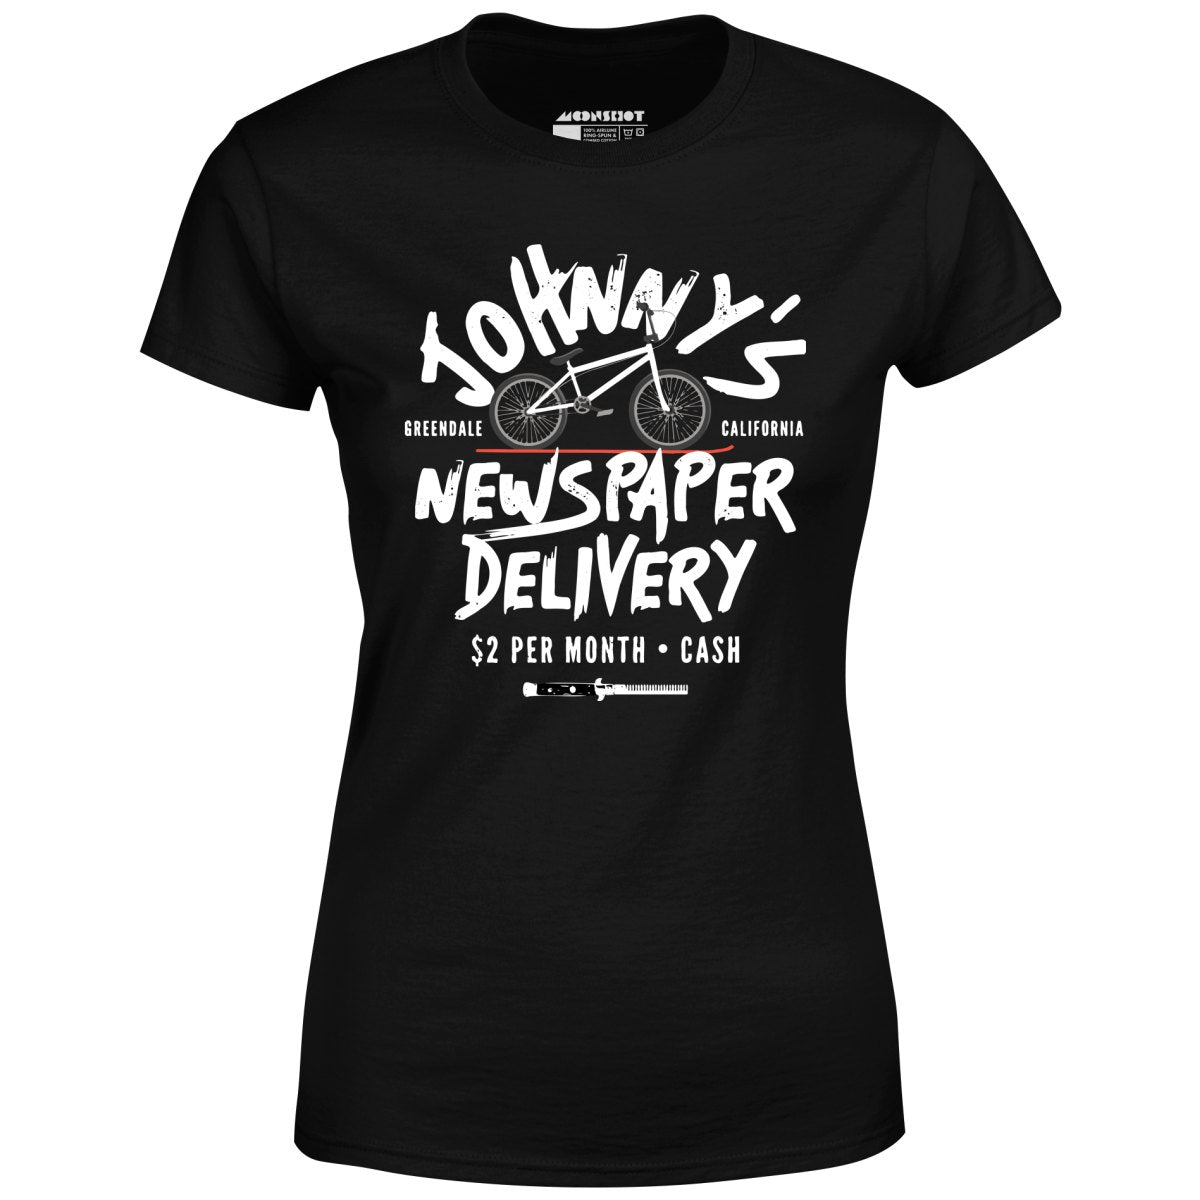 Johnny's Newspaper Delivery - Women's T-Shirt